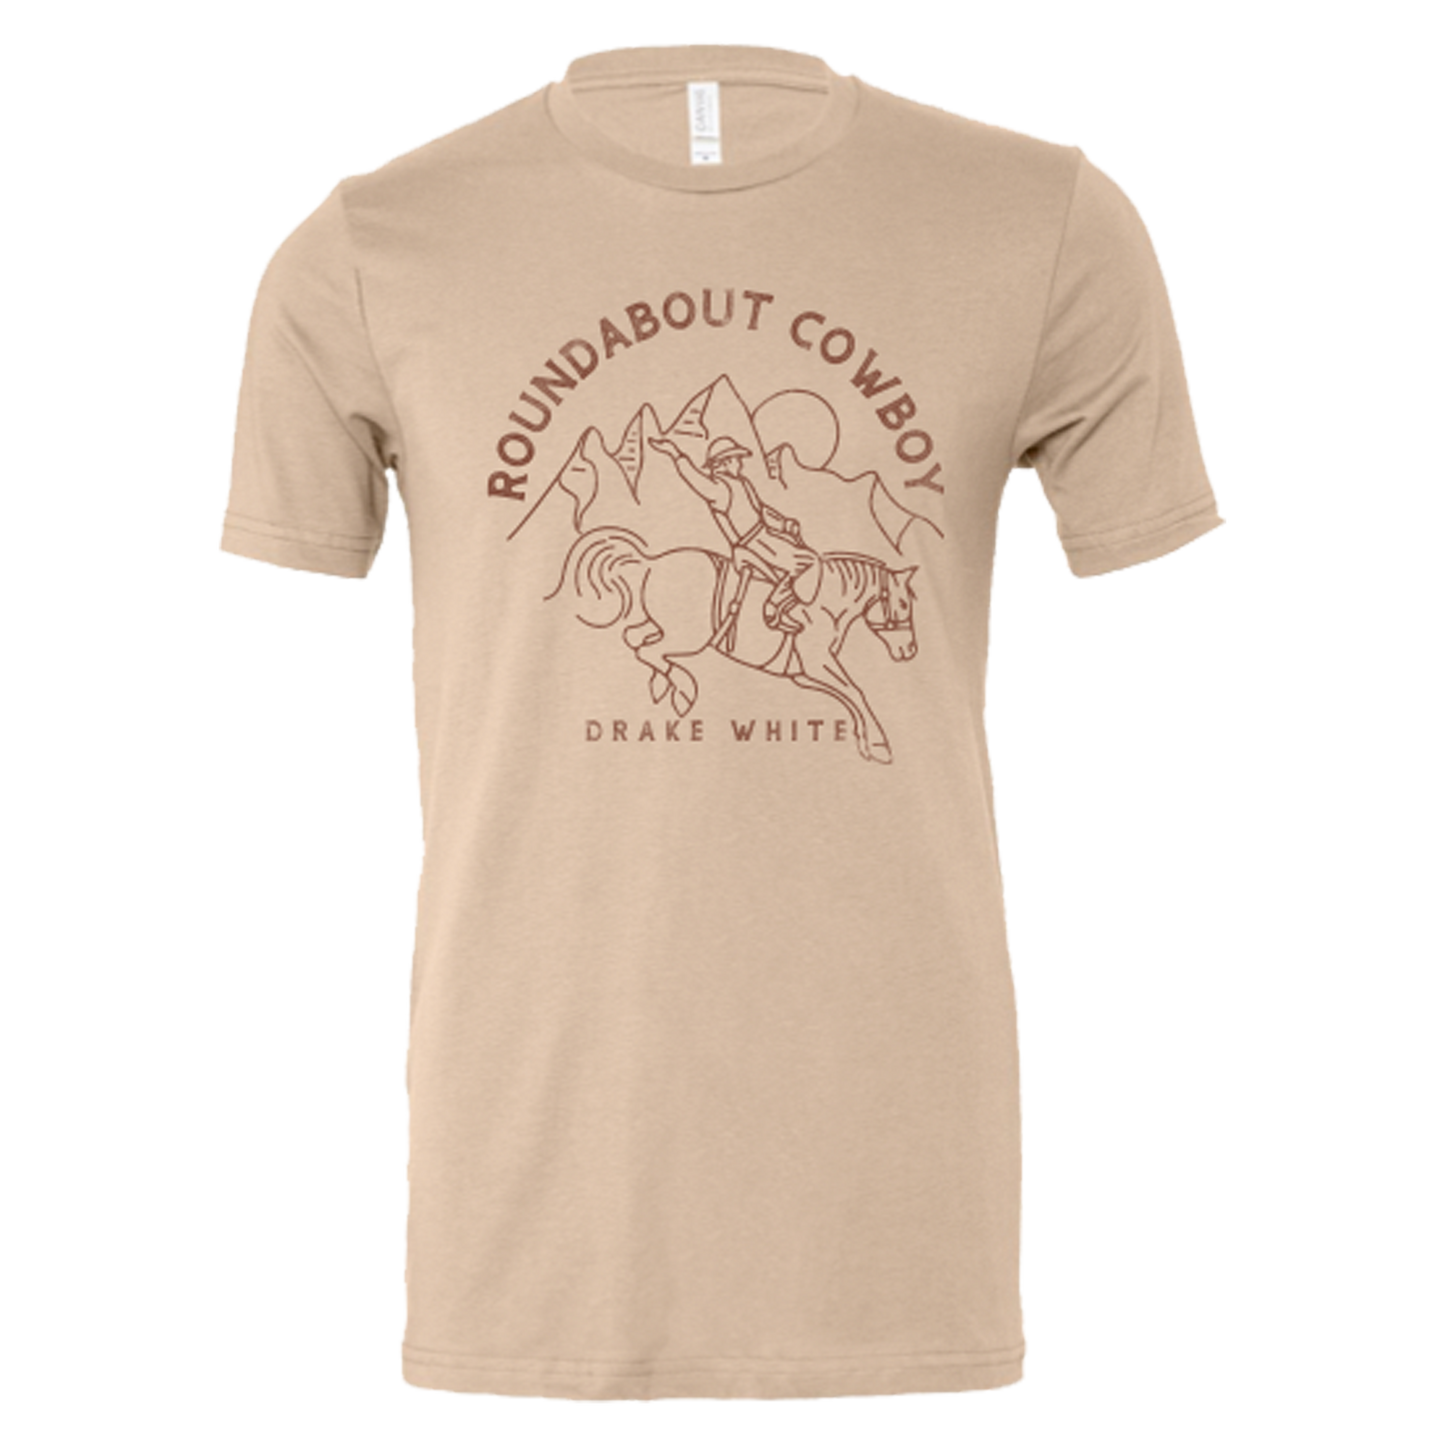 Roundabout Cowboy Tee